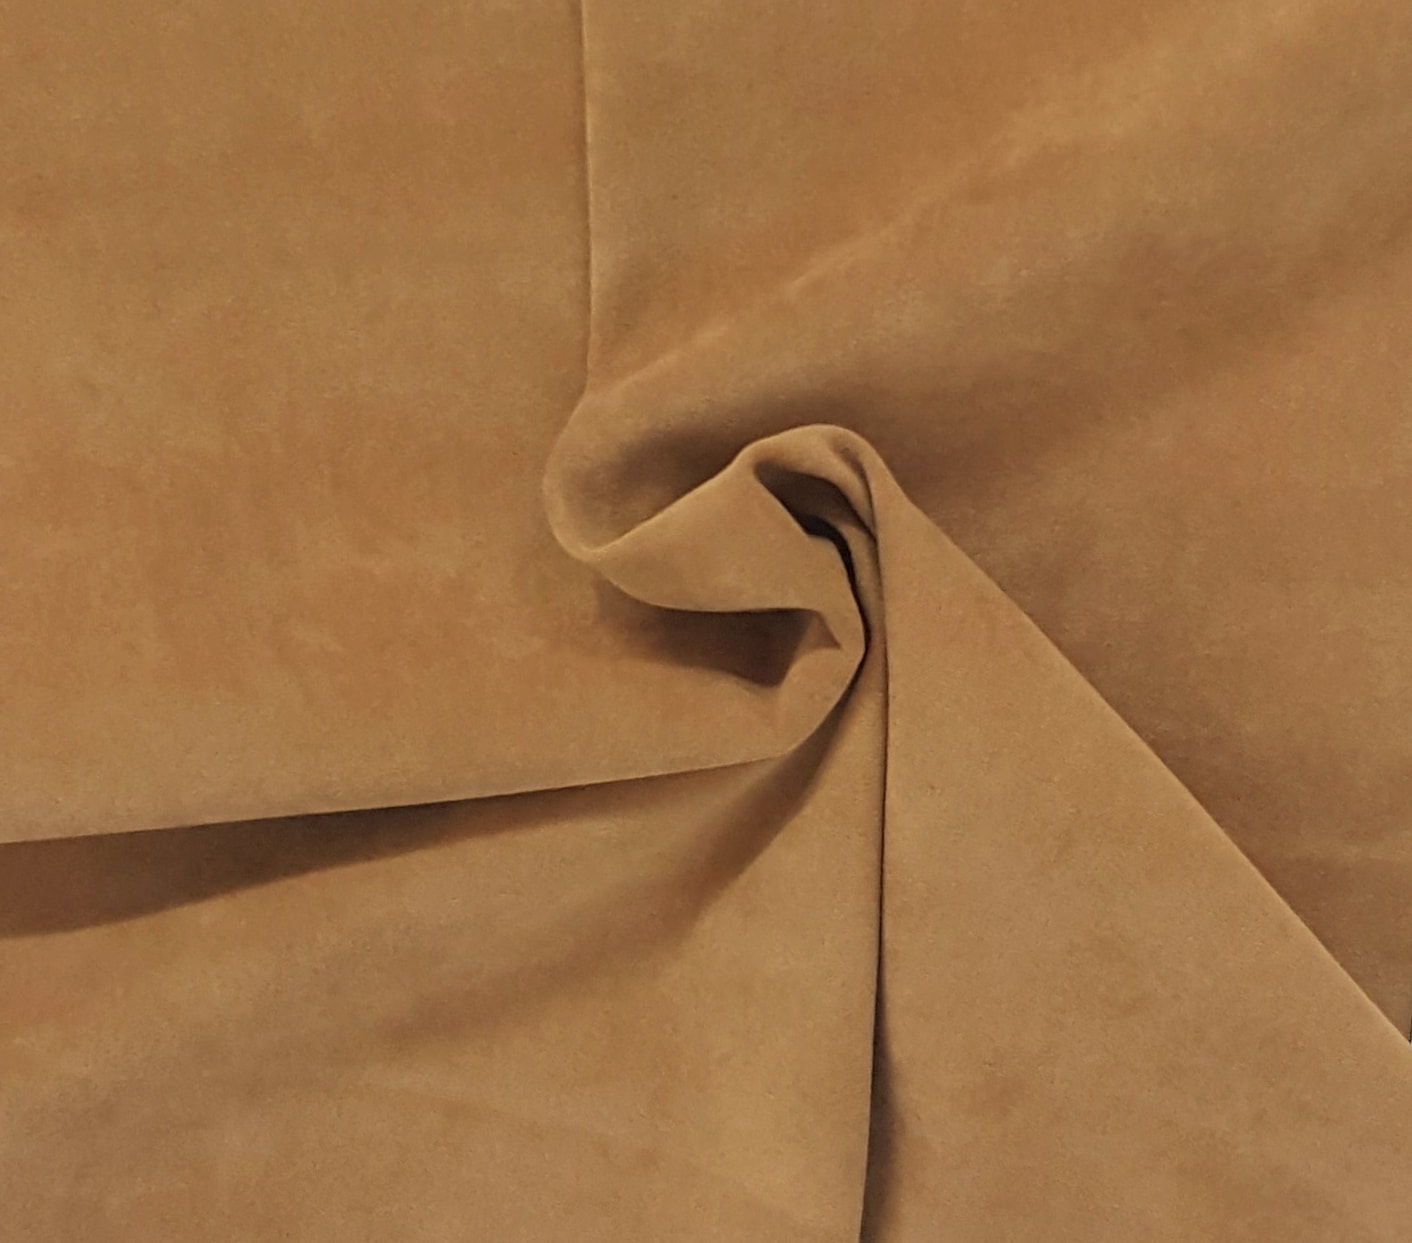 tan moleskin suede satin back fabric by the yard and wholesale in los  angeles